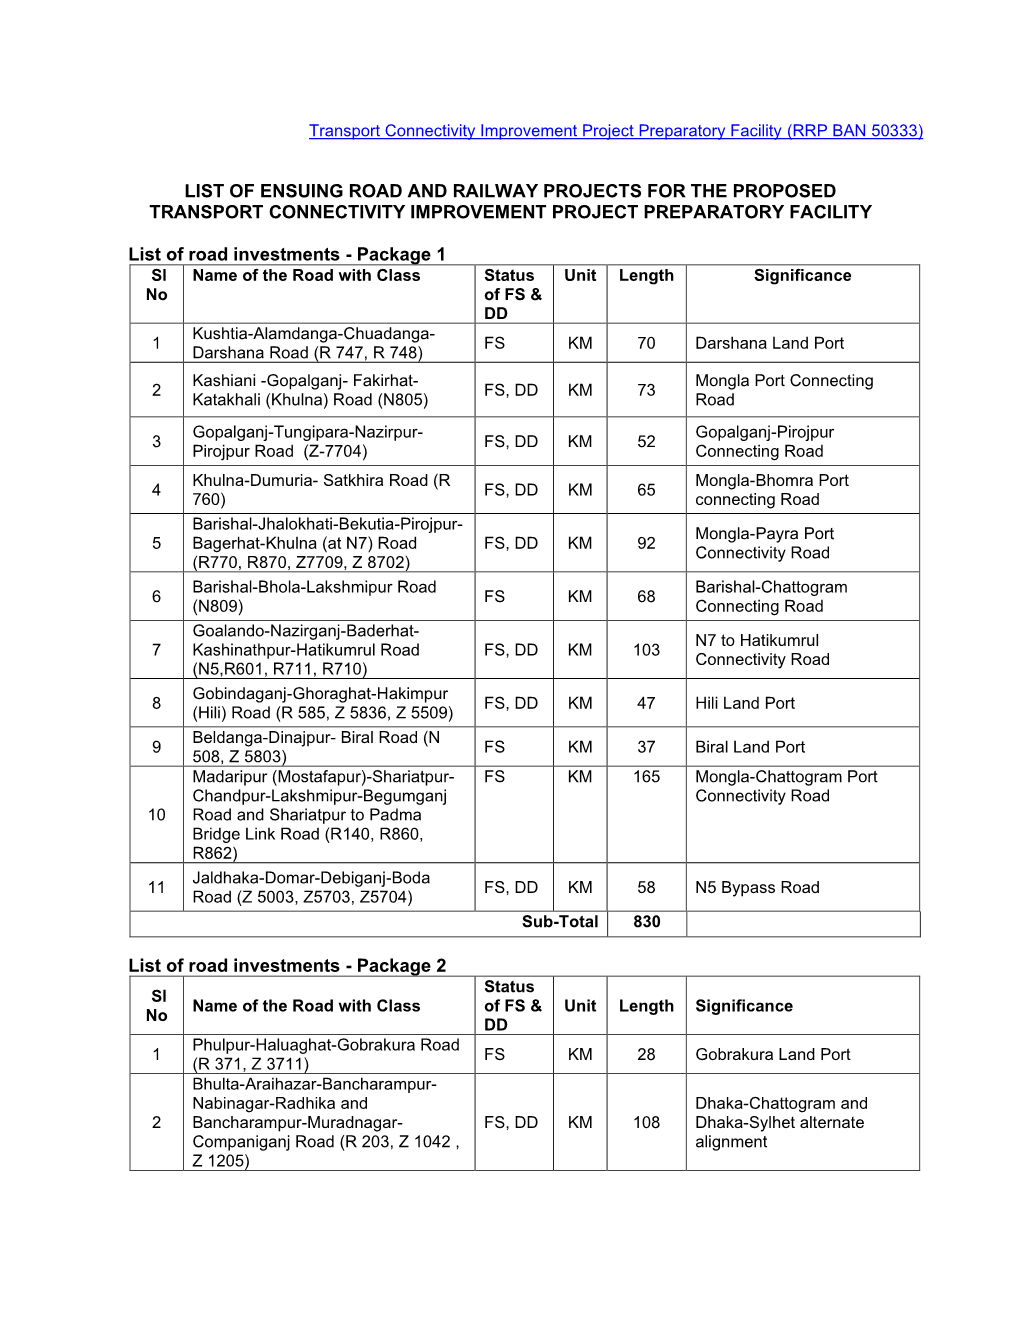 List of Ensuing Road and Railway Projects for the Proposed Transport Connectivity Improvement Project Preparatory Facility